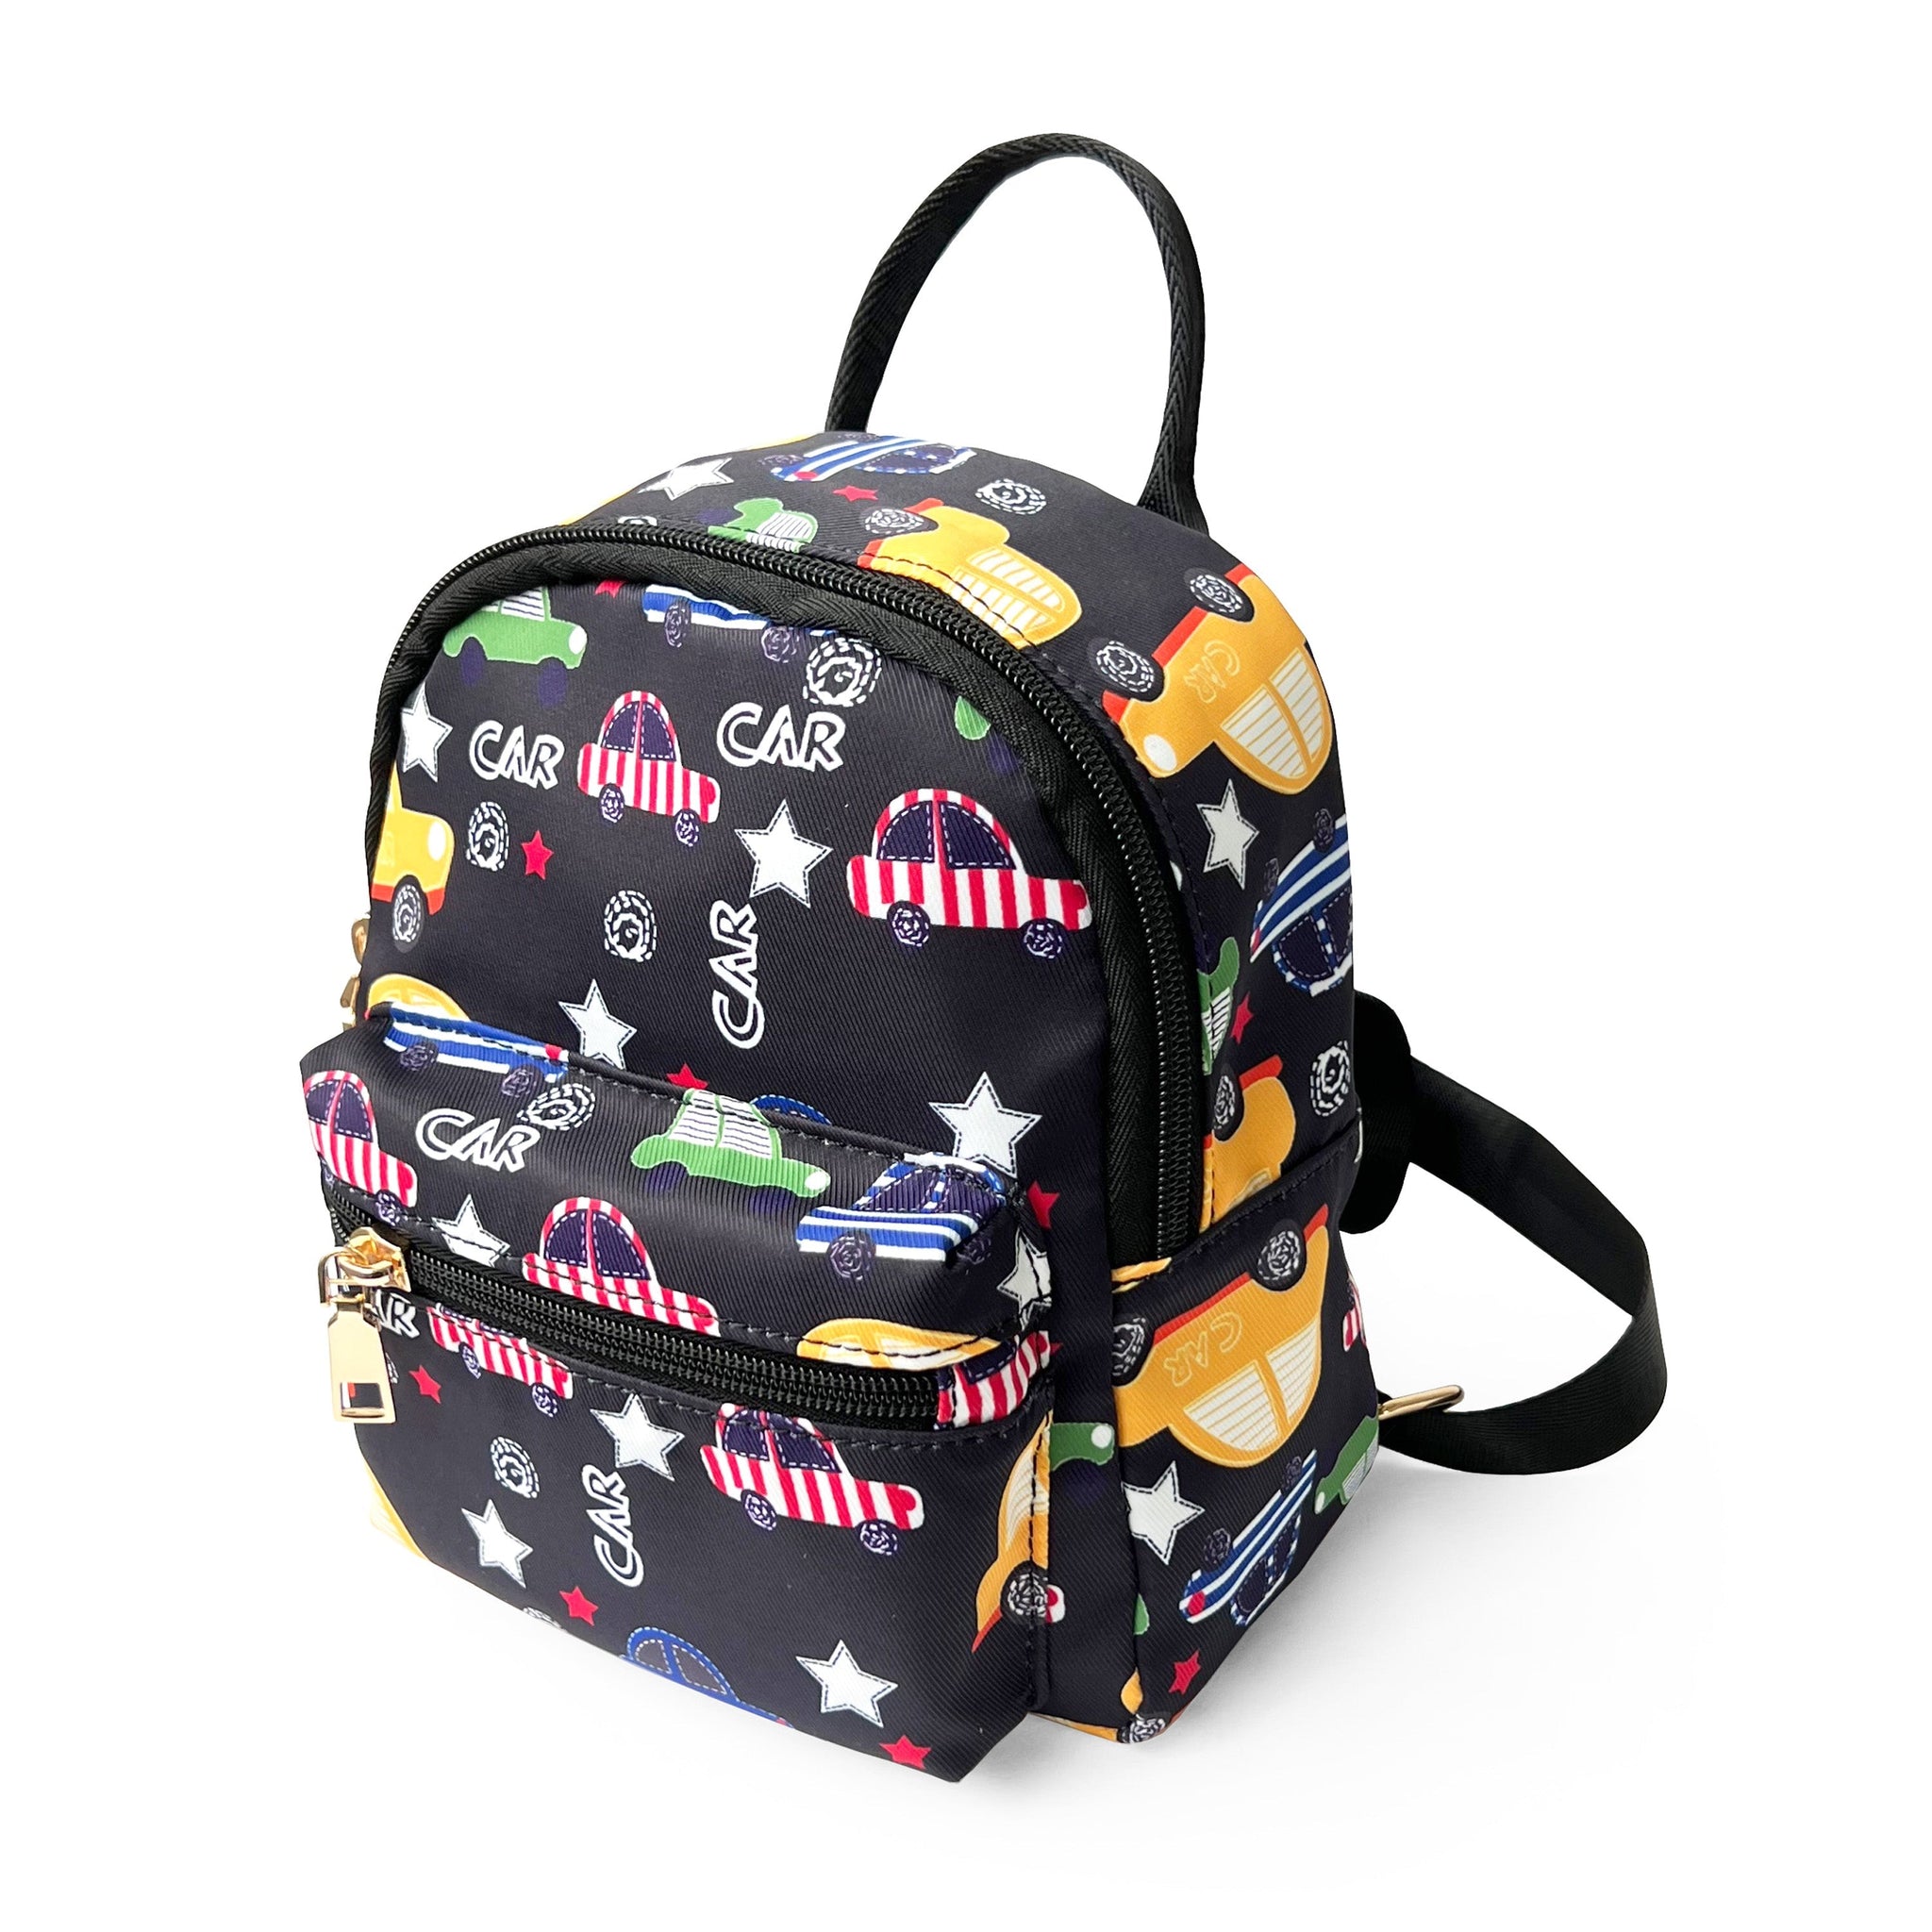 Kids' Backpack with Prints